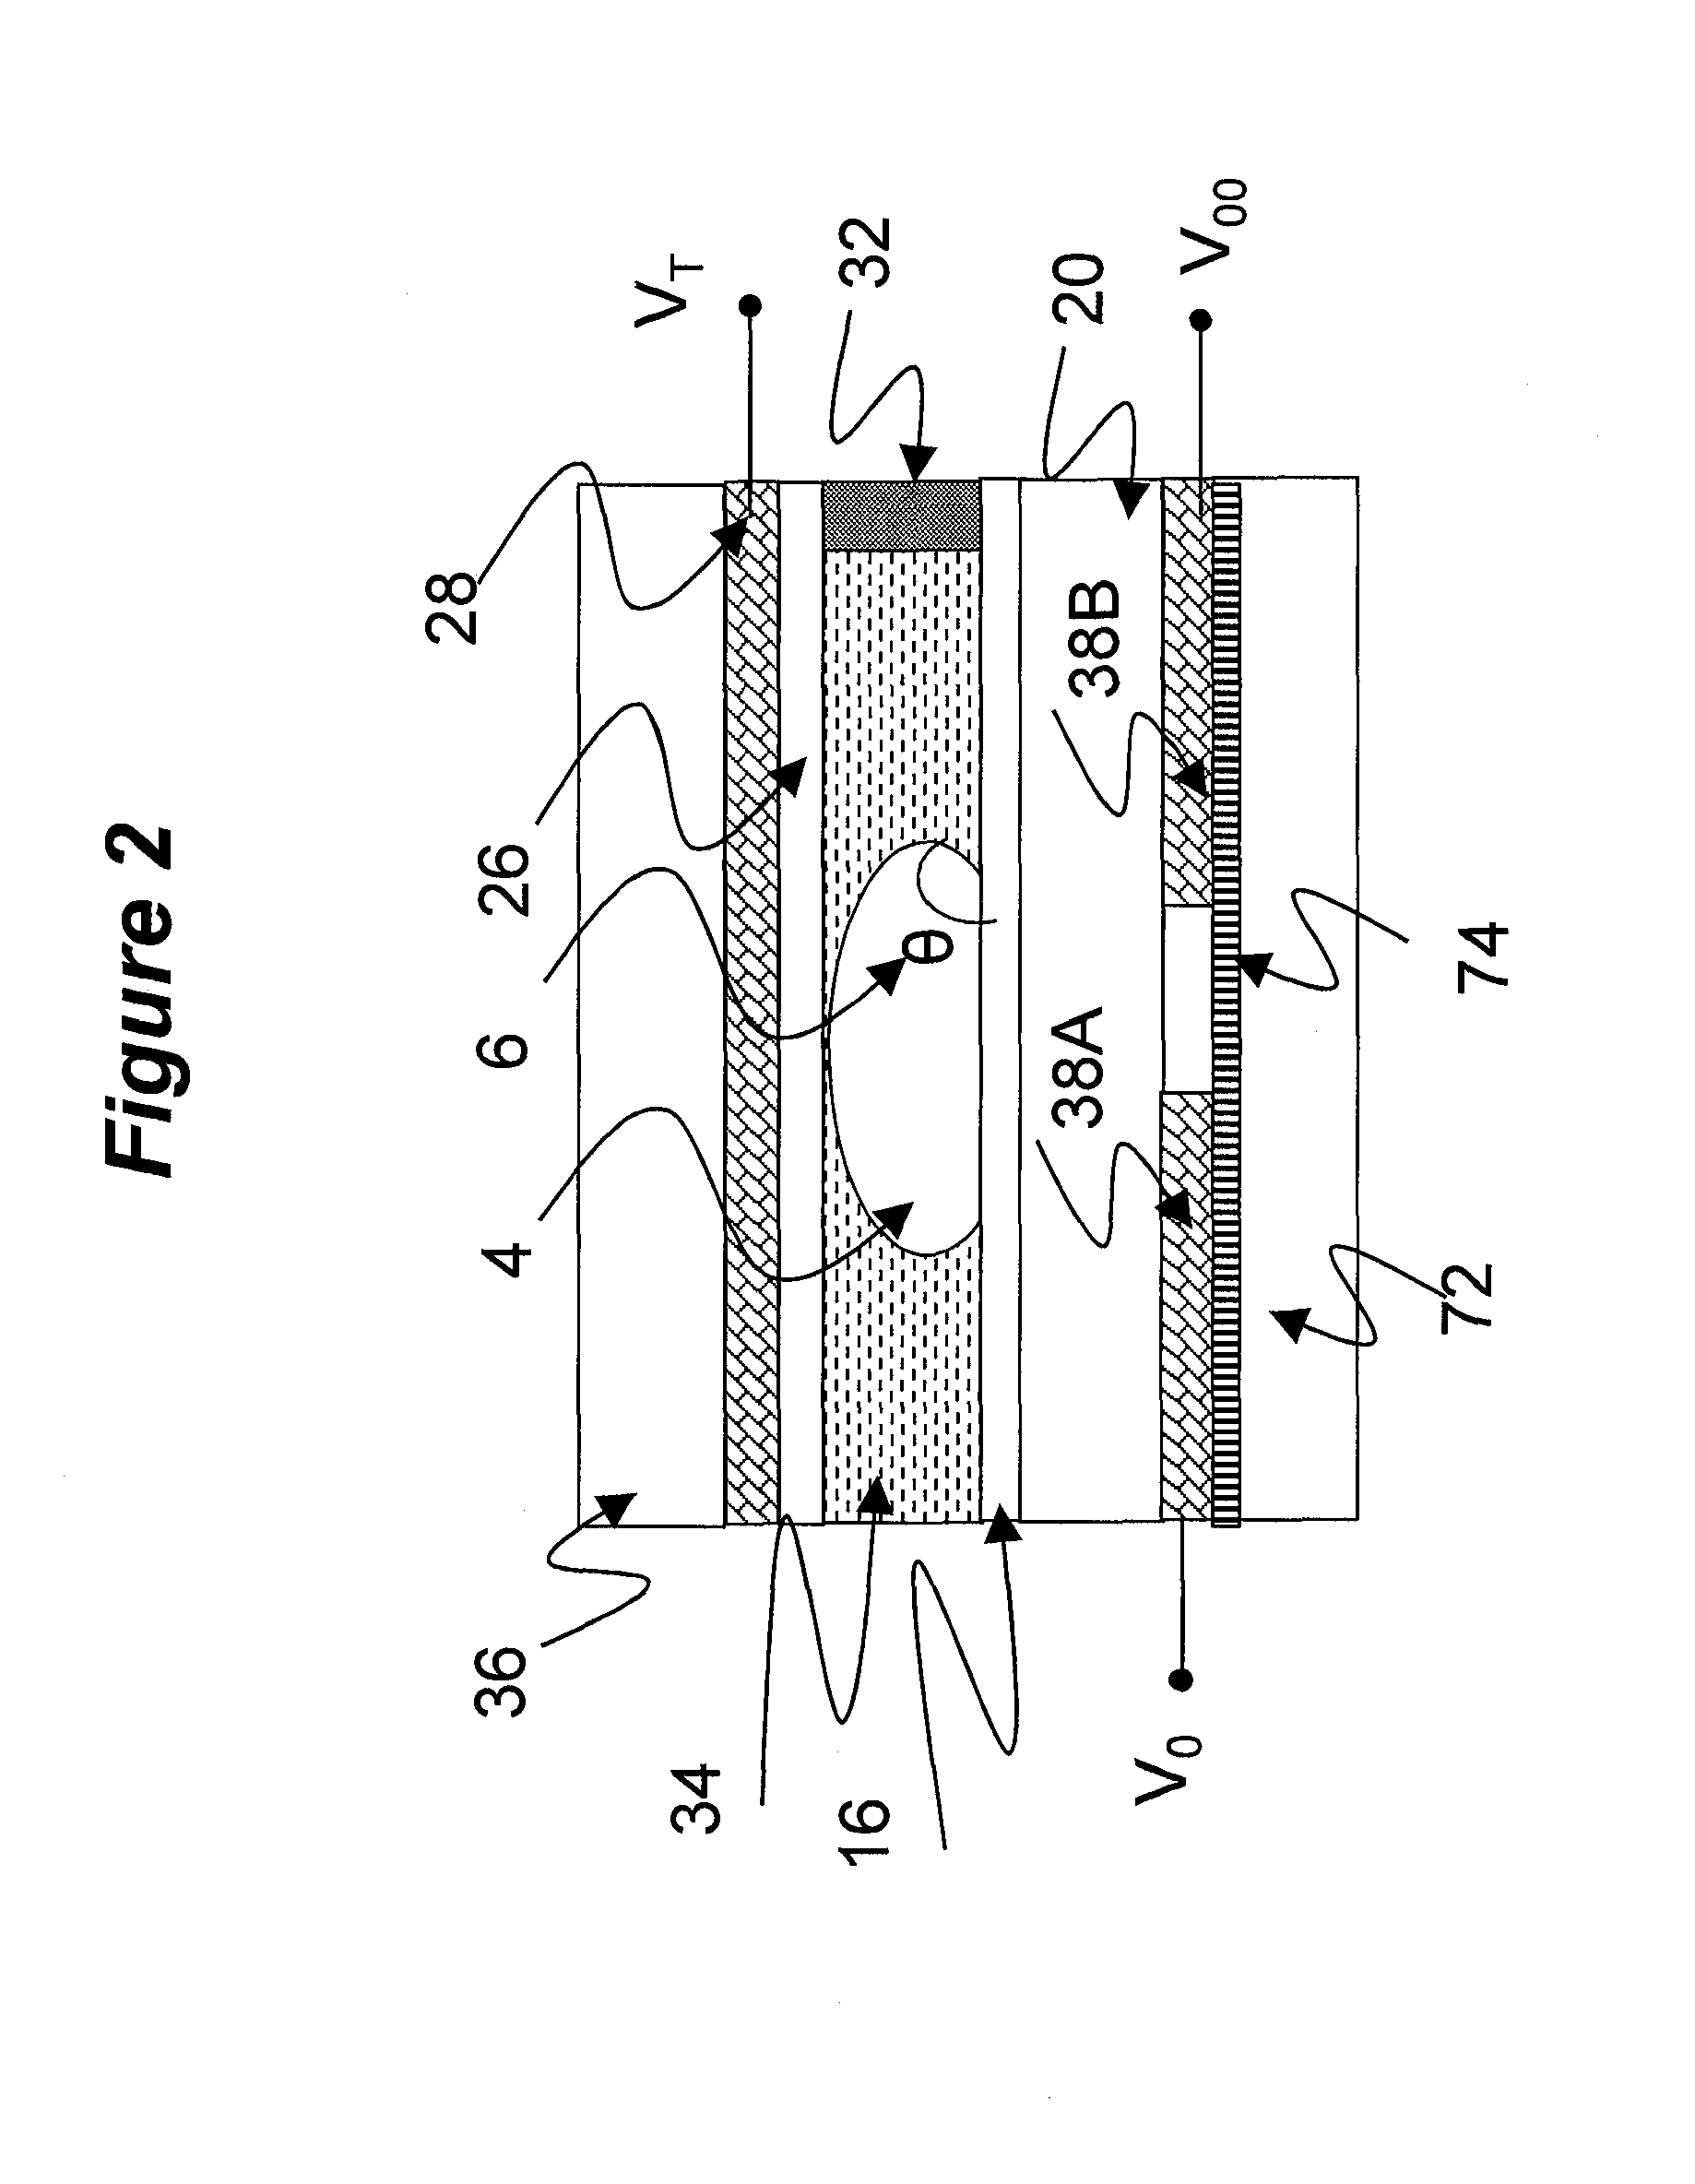 Active matrix device and method of driving the same